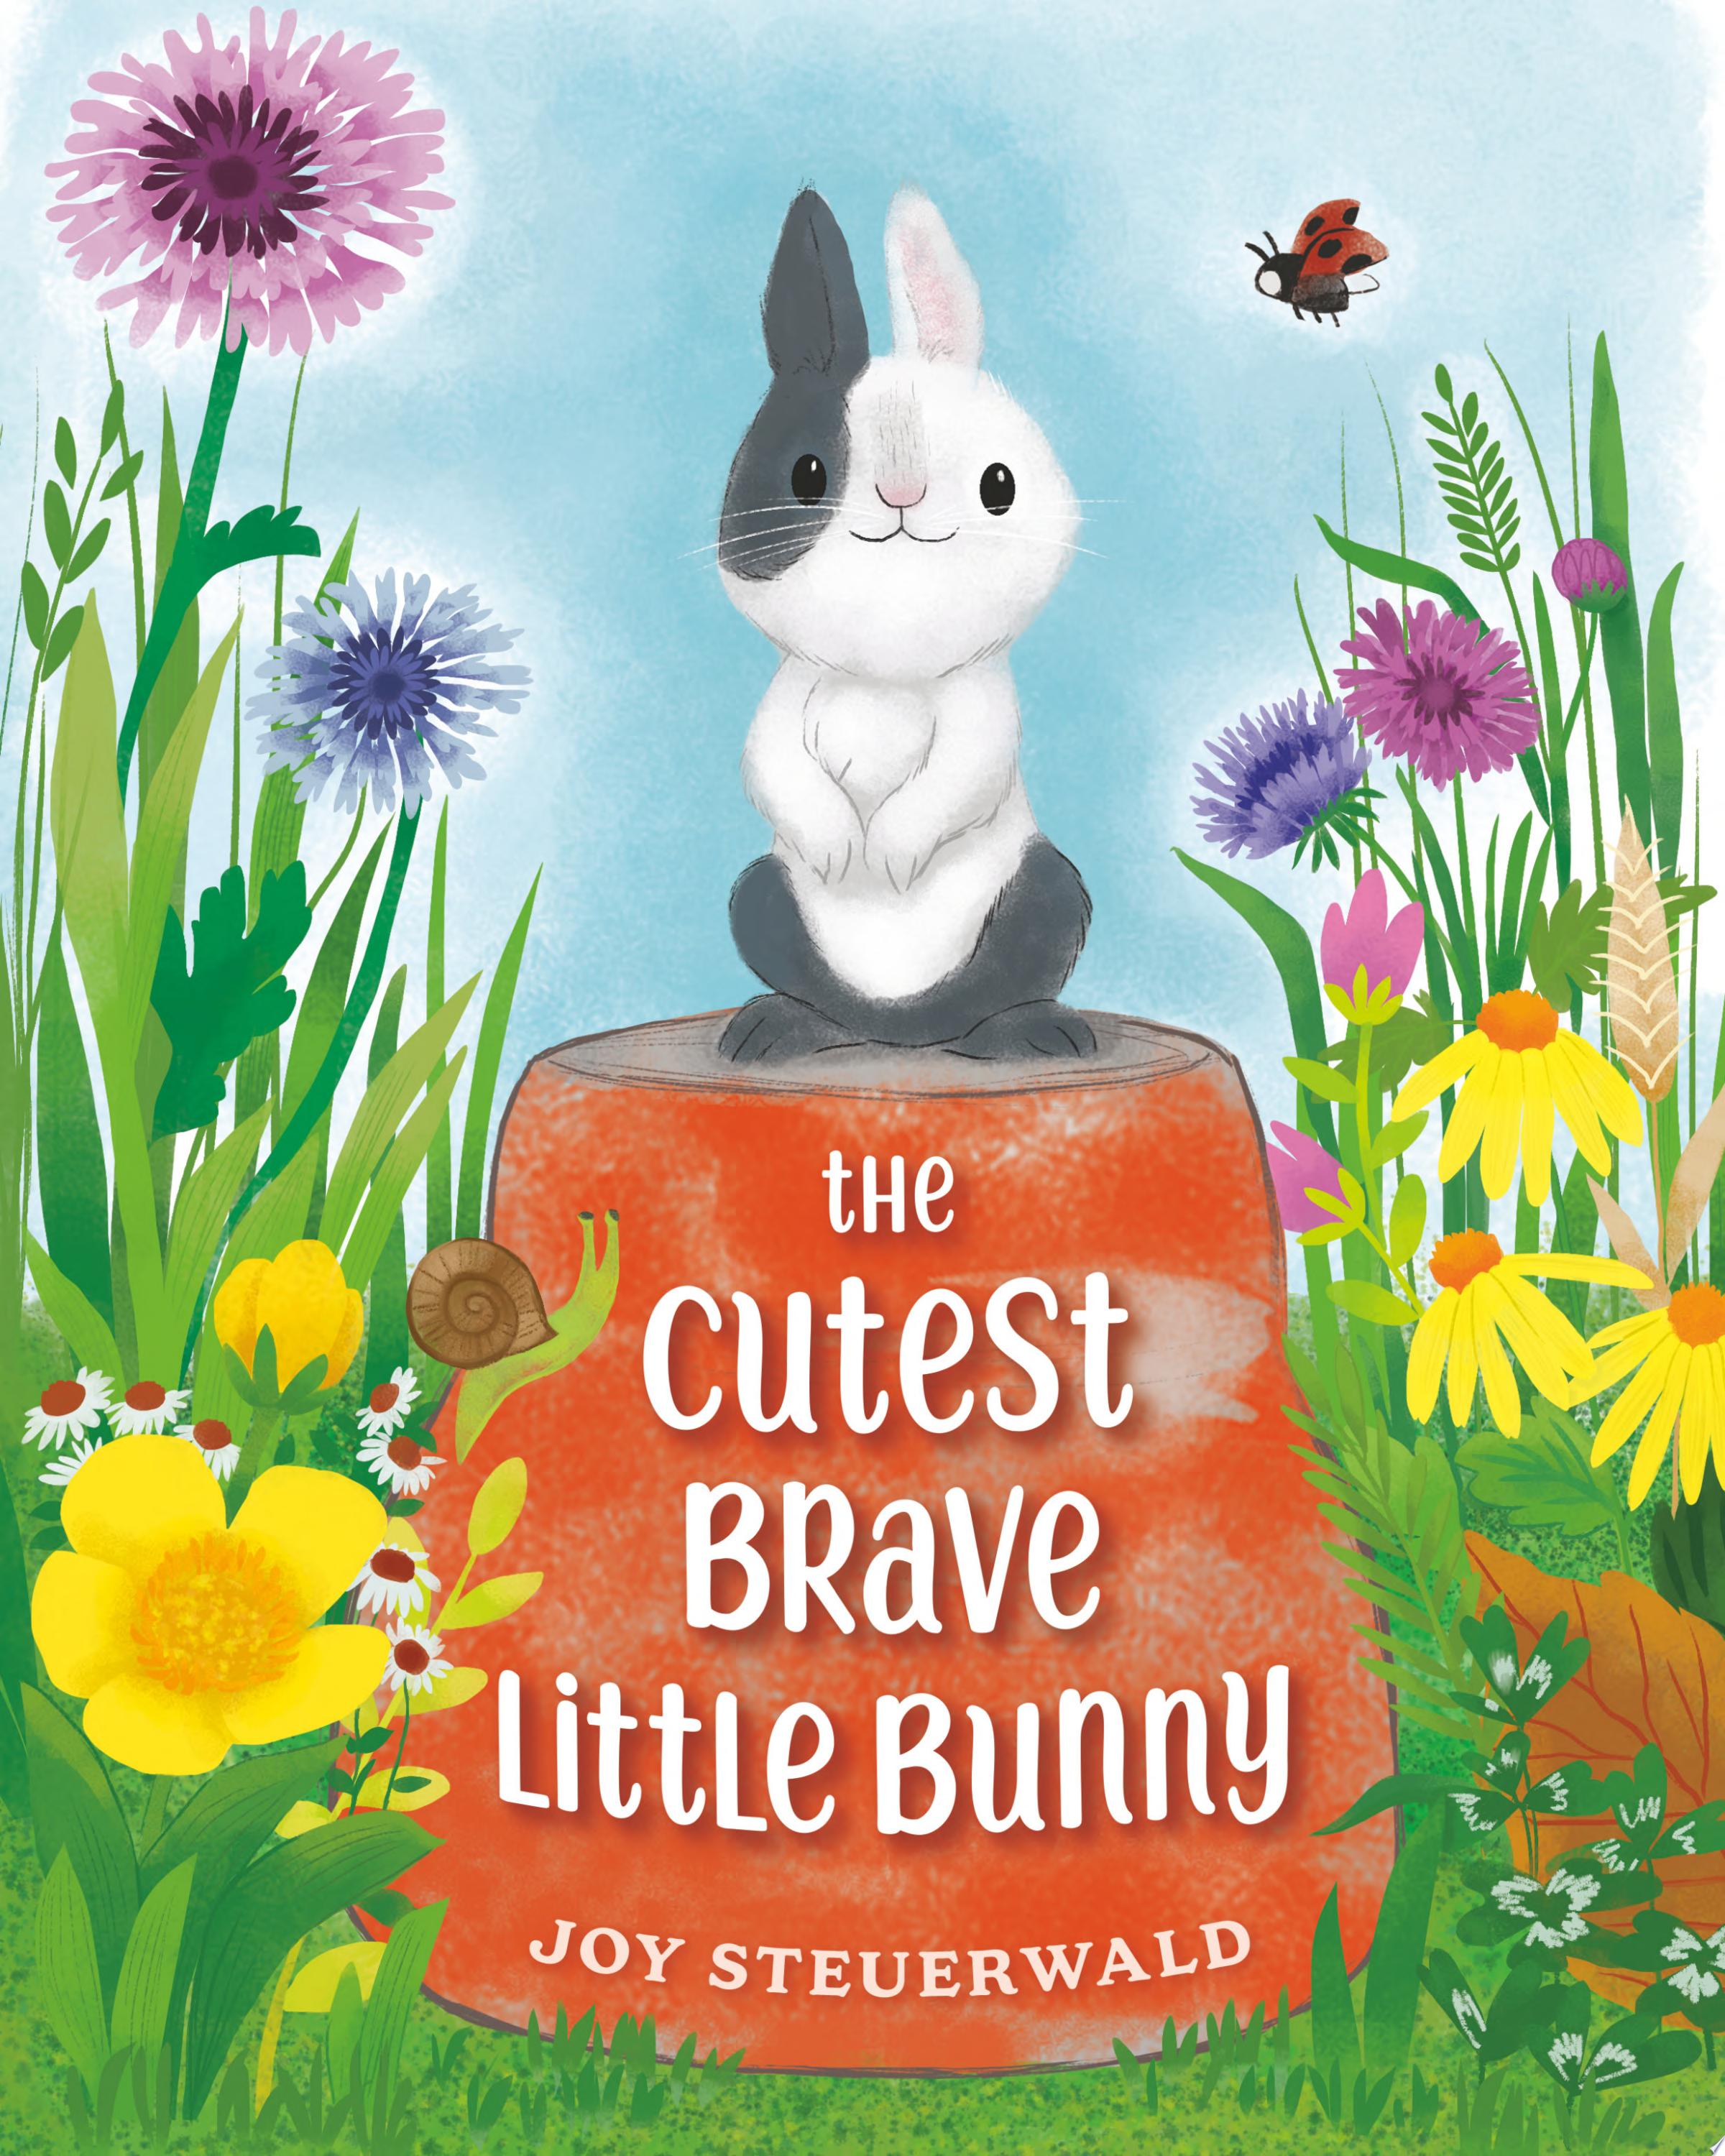 Image for "The Cutest Brave Little Bunny"